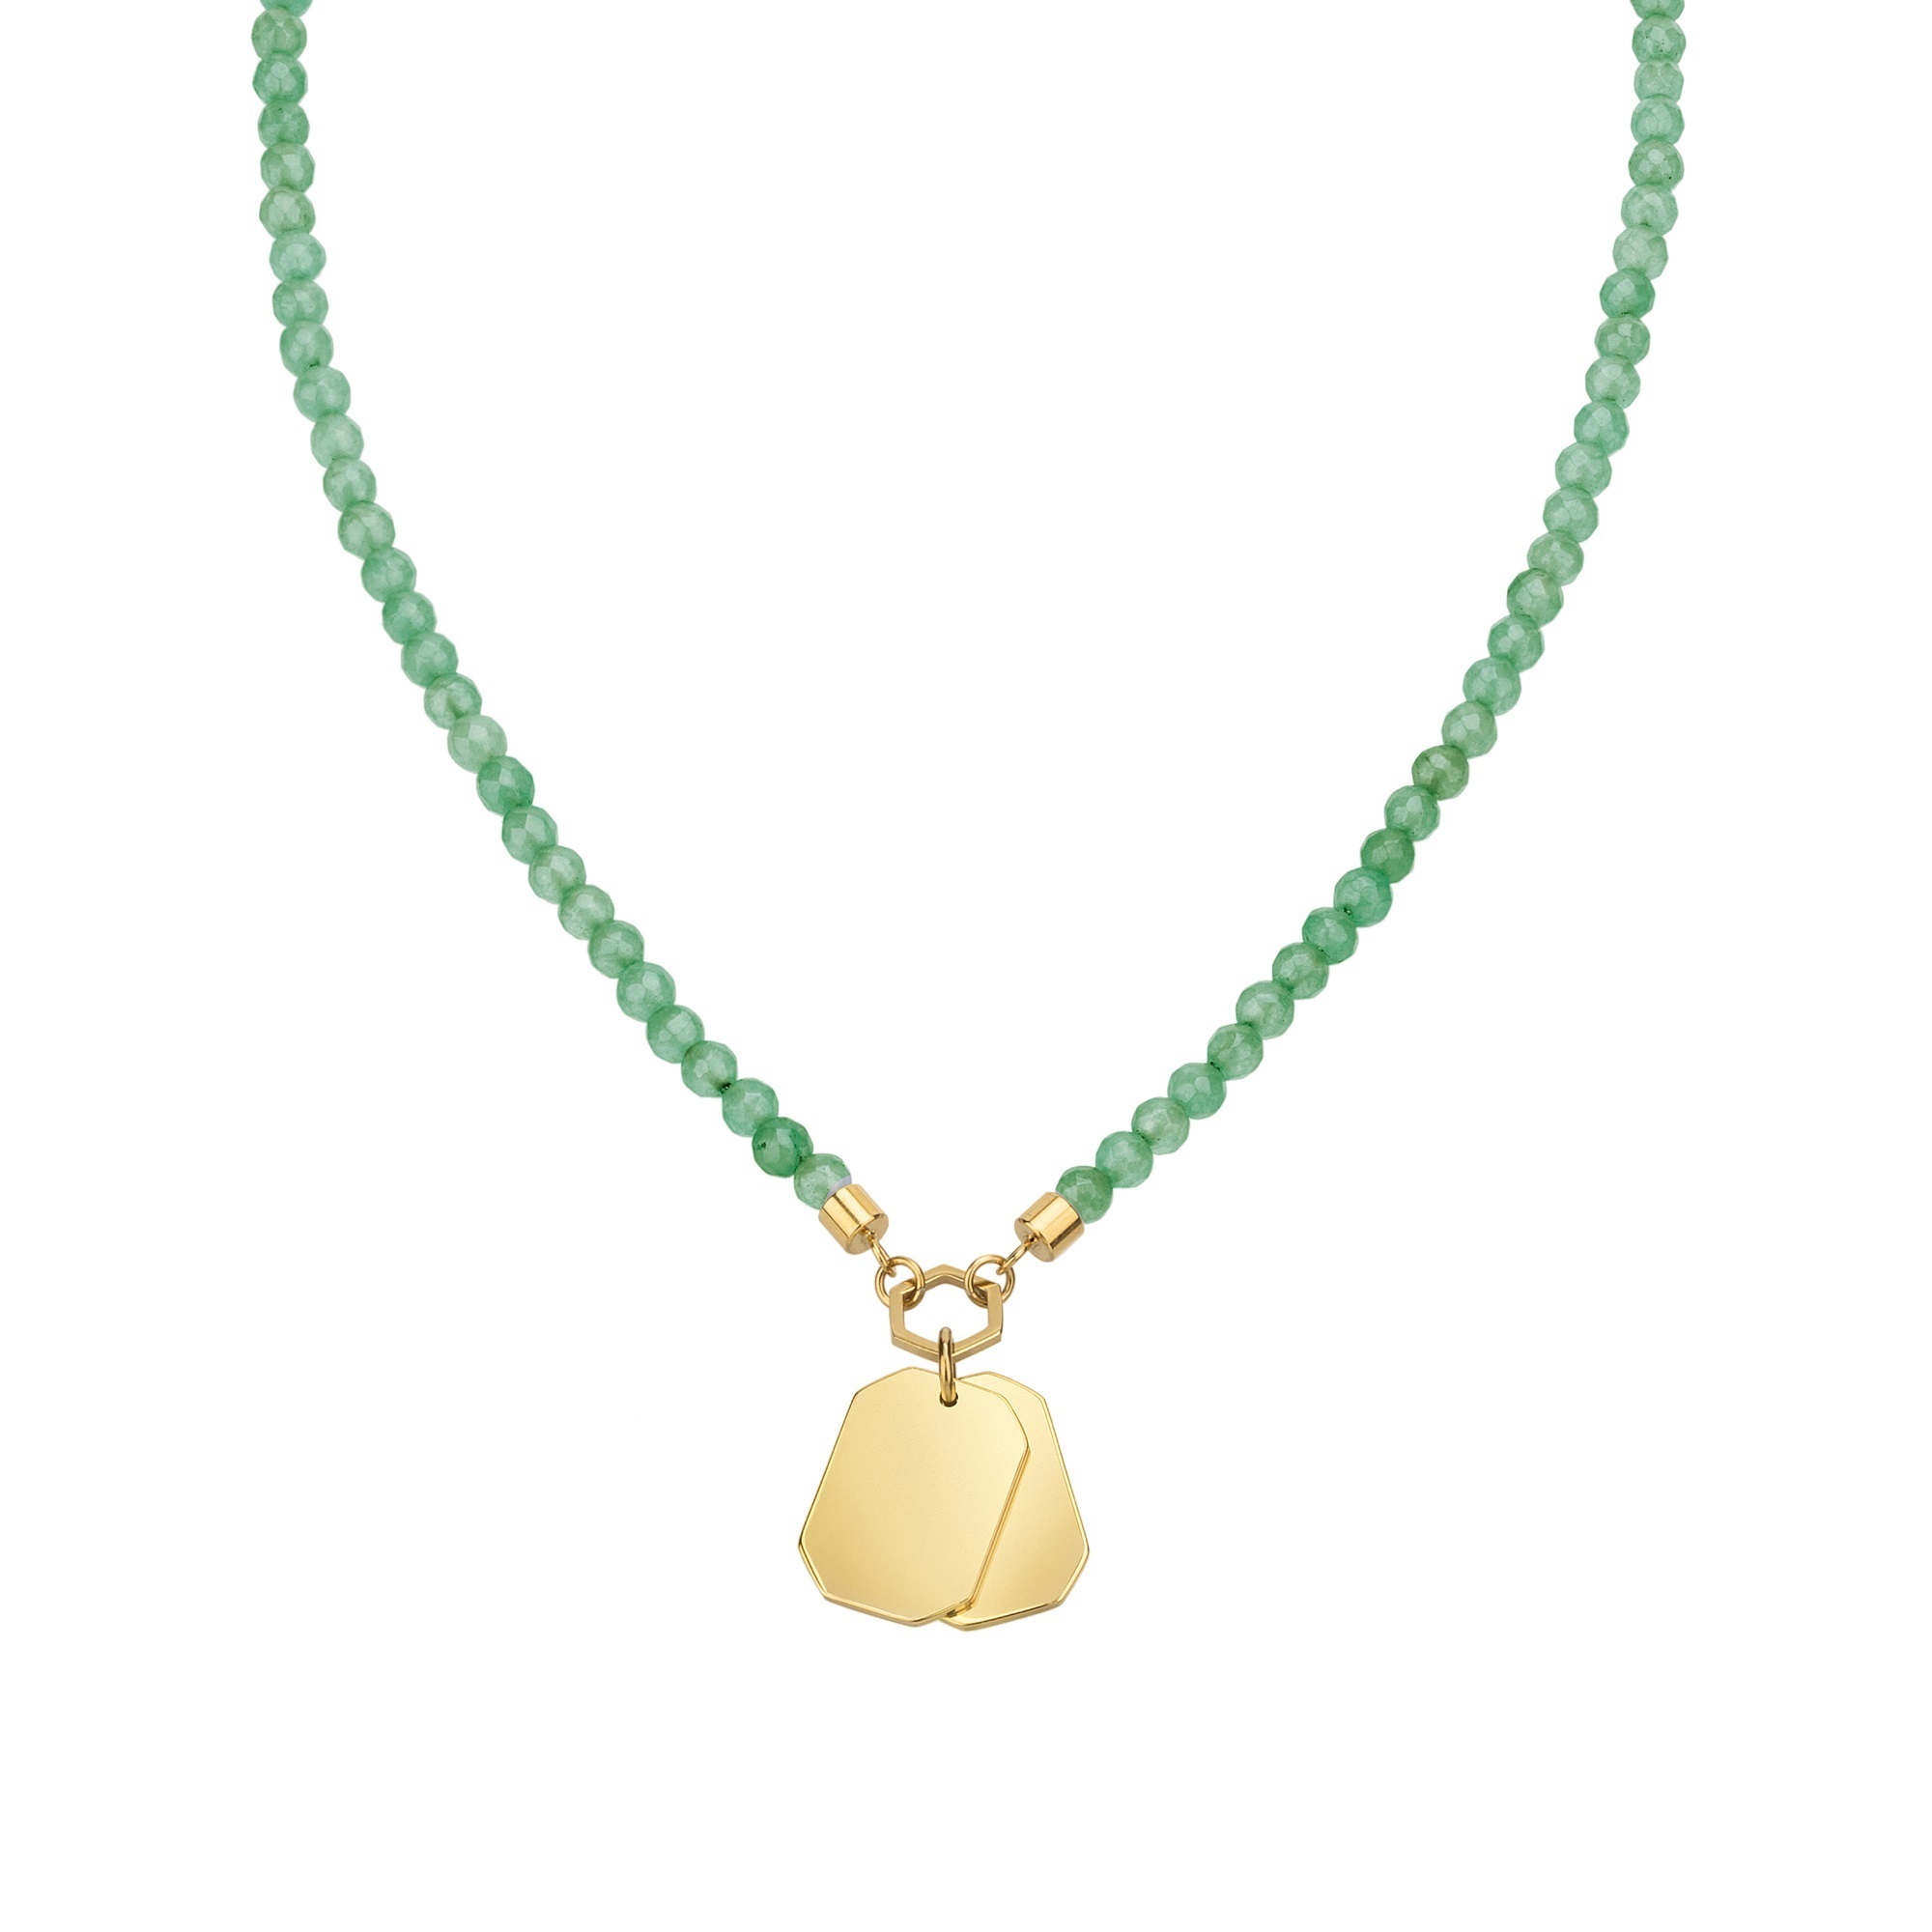 PRIVATE CODE - GREEN ADVENTURINE NECKLACE WITH IP GOLD STEEL PENDANT - 2 - TJ3152 | Breil